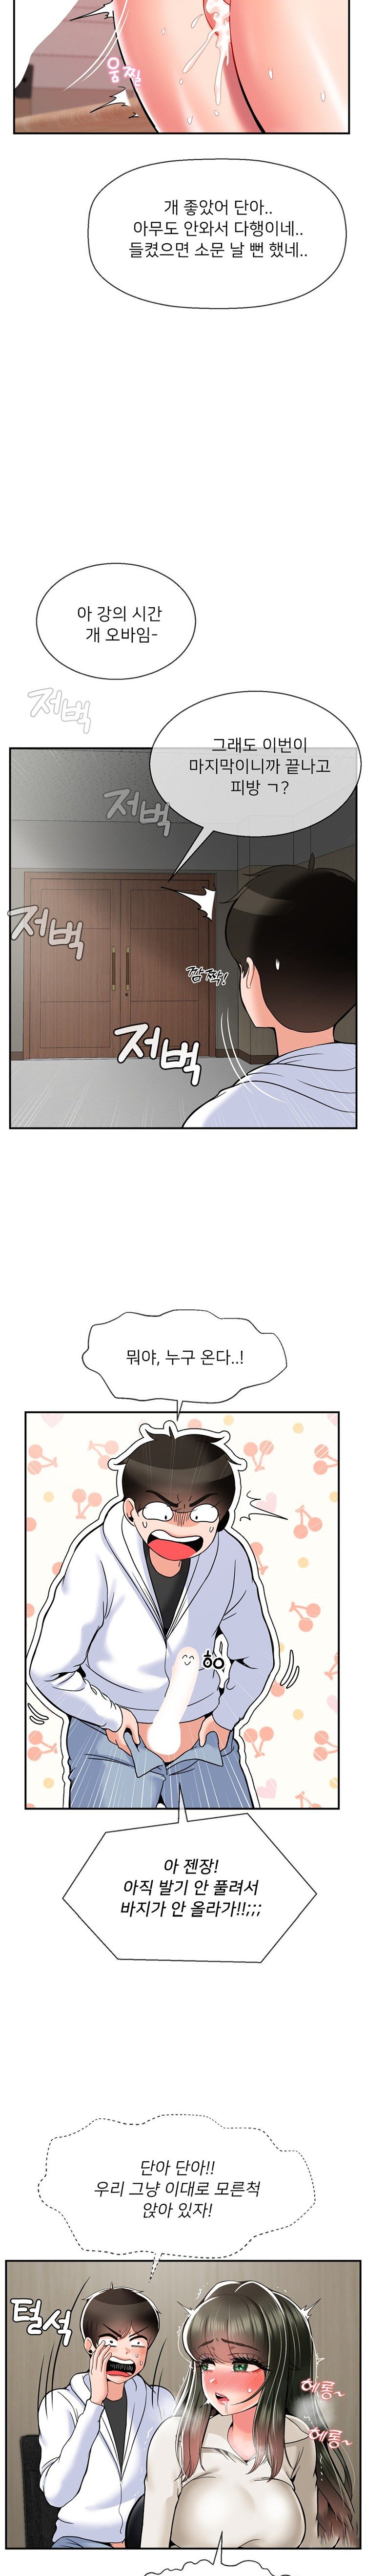 seventeenth-only-son-raw-chap-31-7